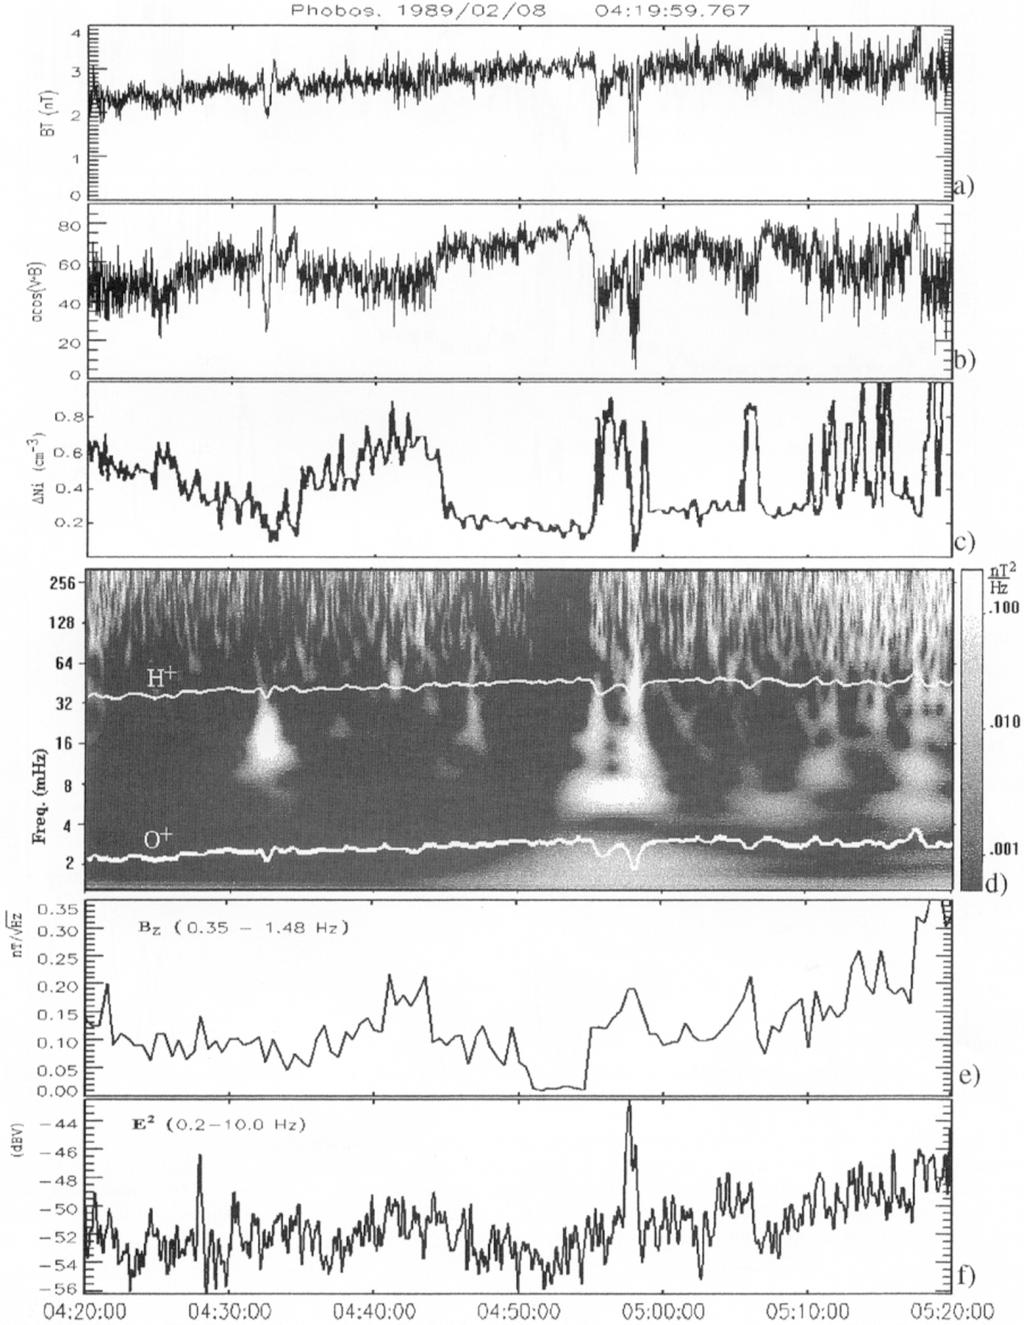 V. TARASOV et al.: WAVELET APPLICATION TO THE MAGNETIC FIELD TURBULENCE 703 potential (an increase of Ne derived from probe measurements), starts about 1 hr before the shock crossing.